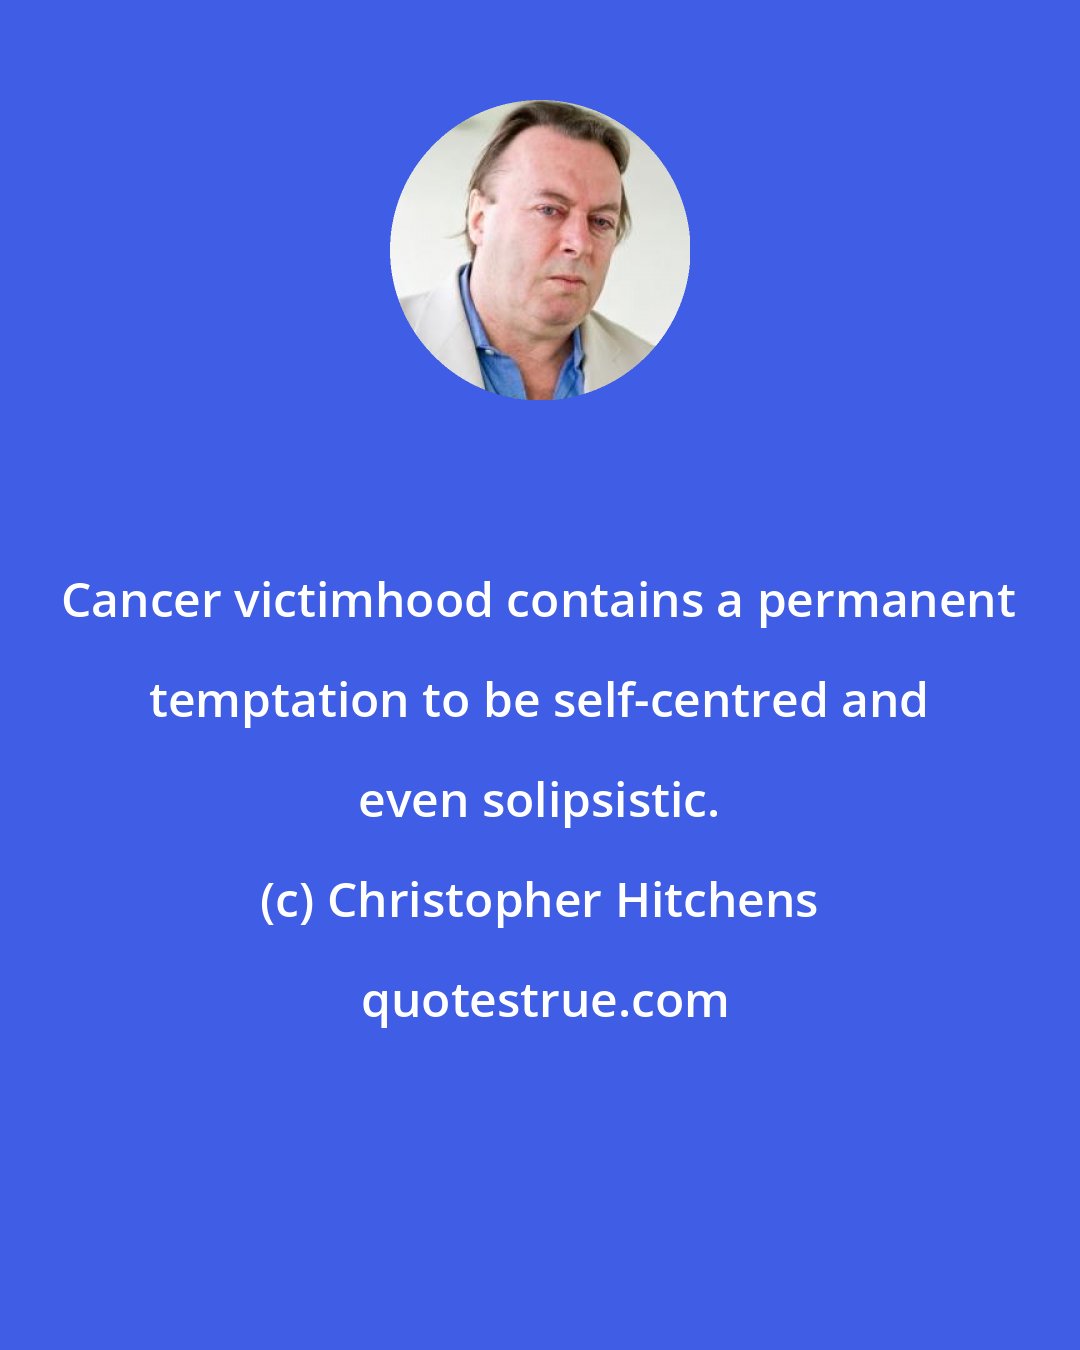 Christopher Hitchens: Cancer victimhood contains a permanent temptation to be self-centred and even solipsistic.